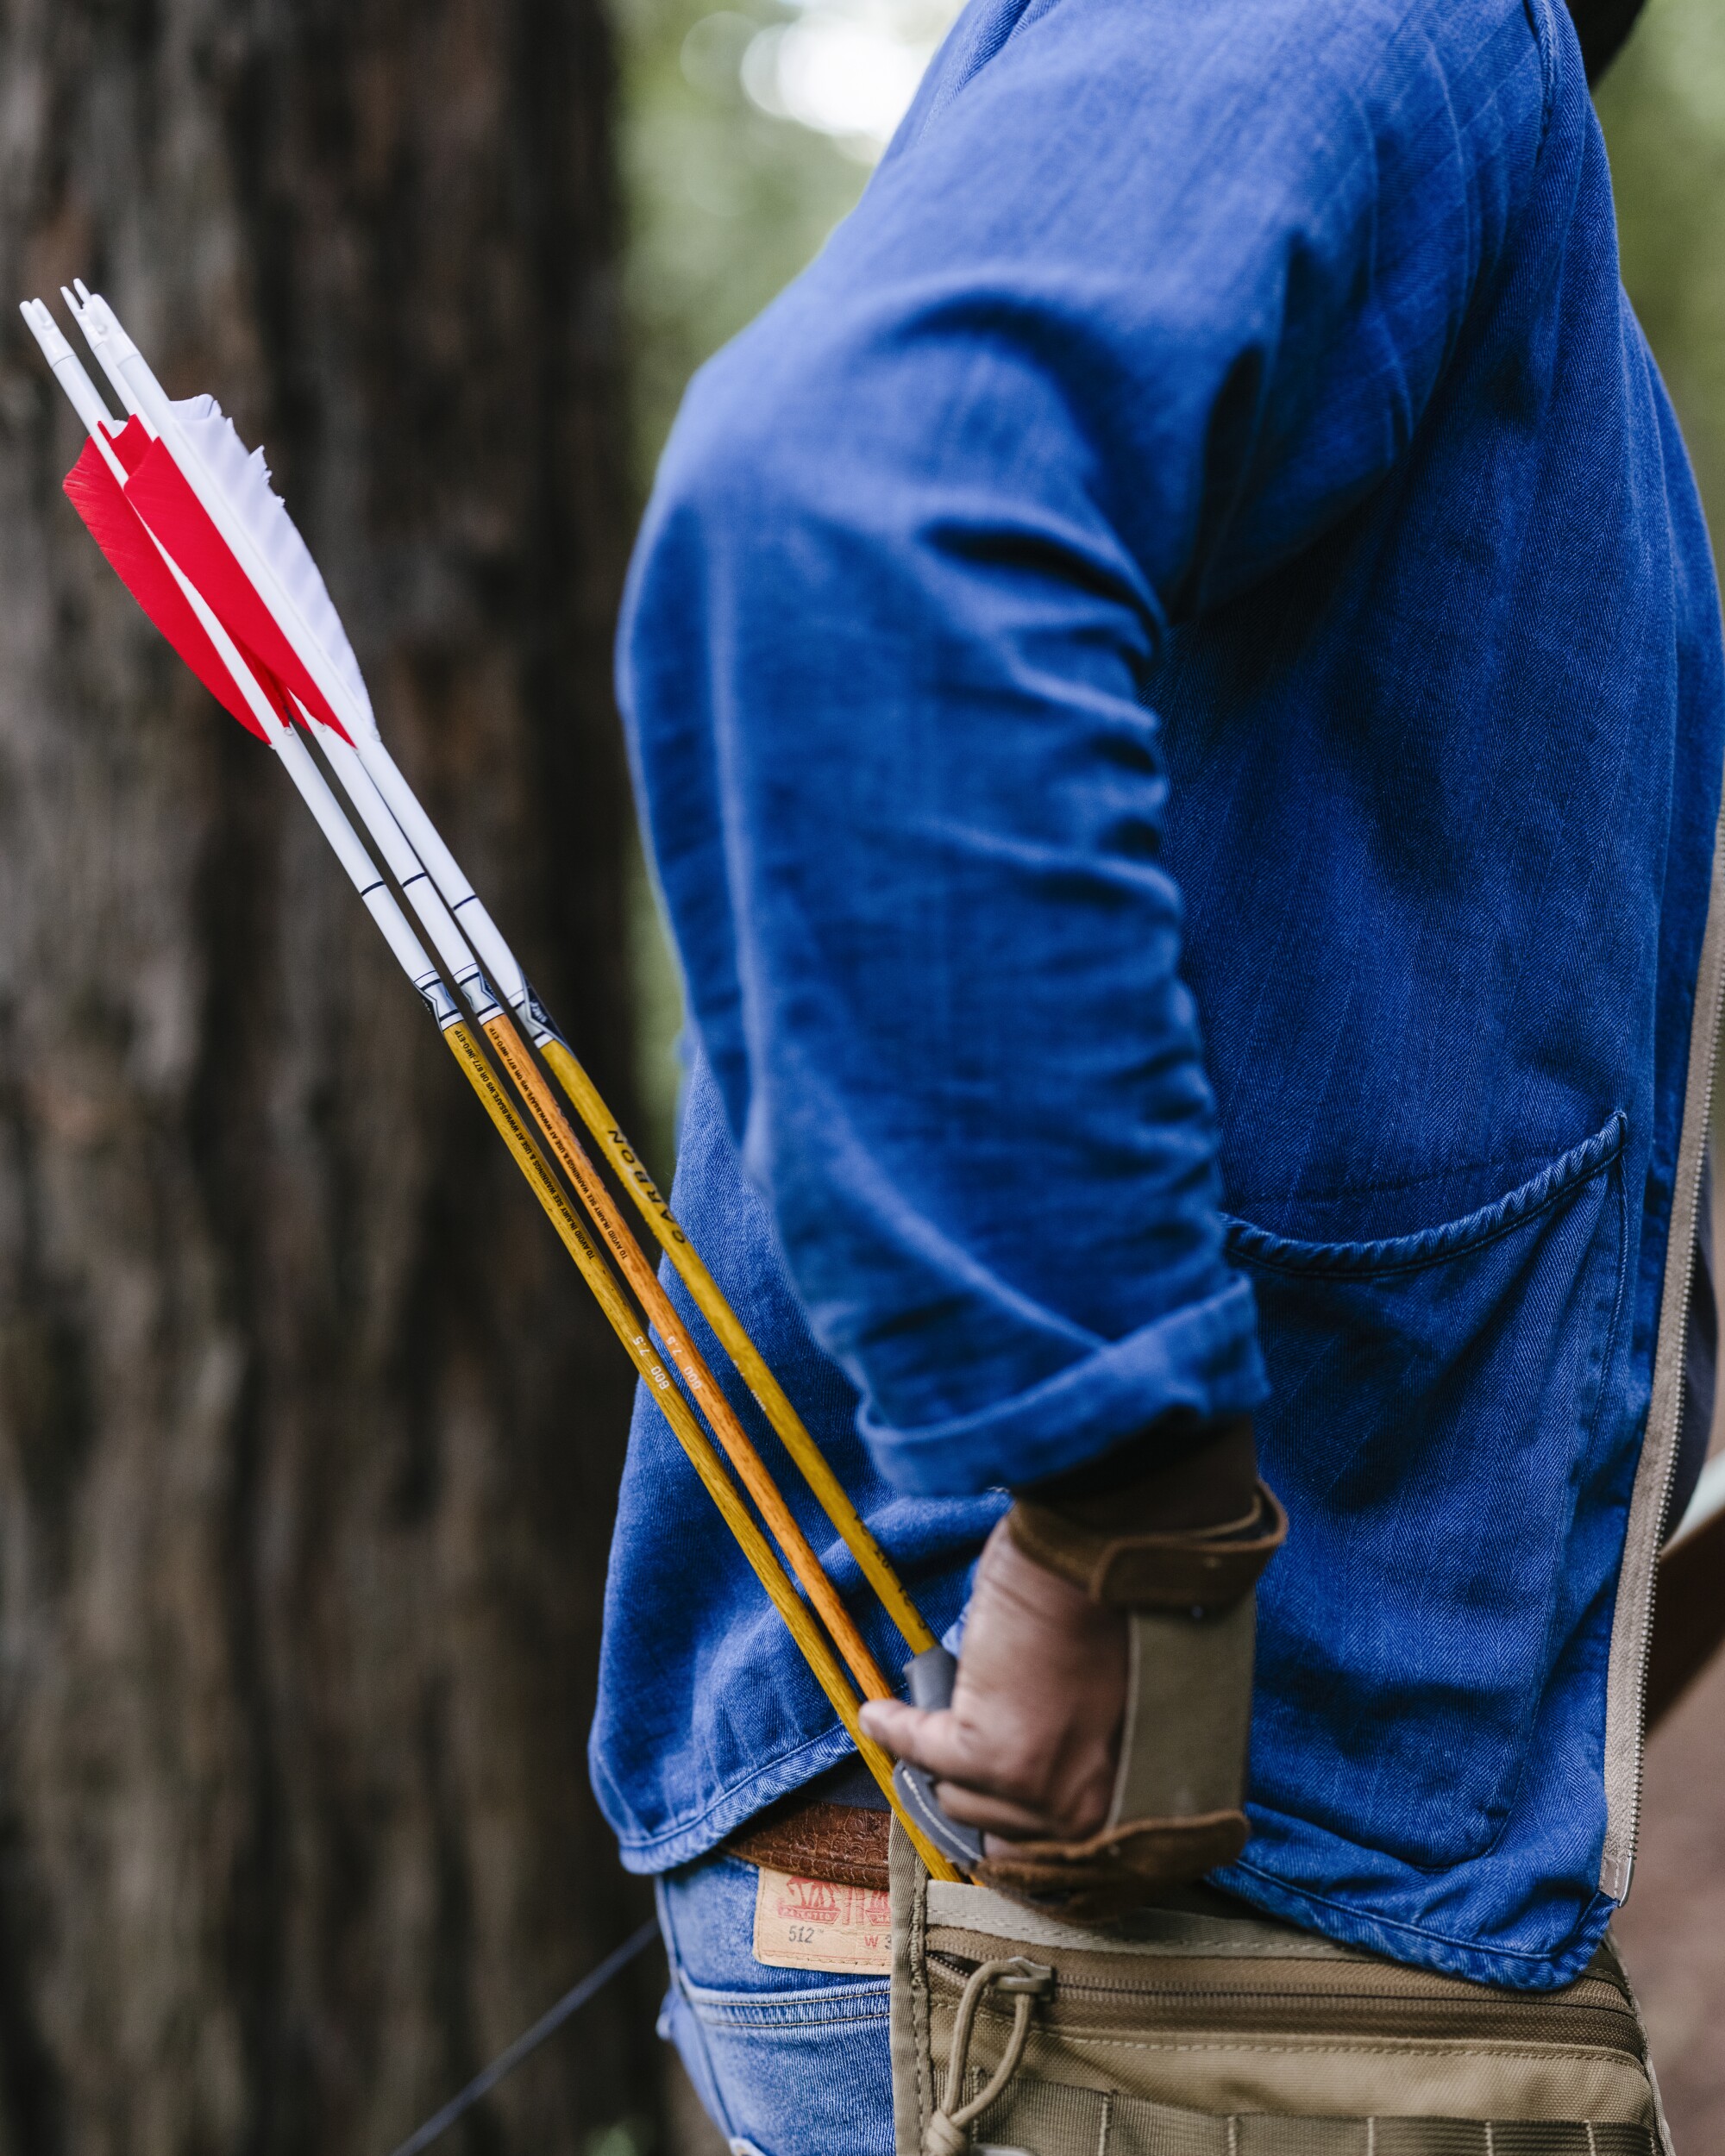 A person in a blue shirt reaches into a quiver full of arrows.